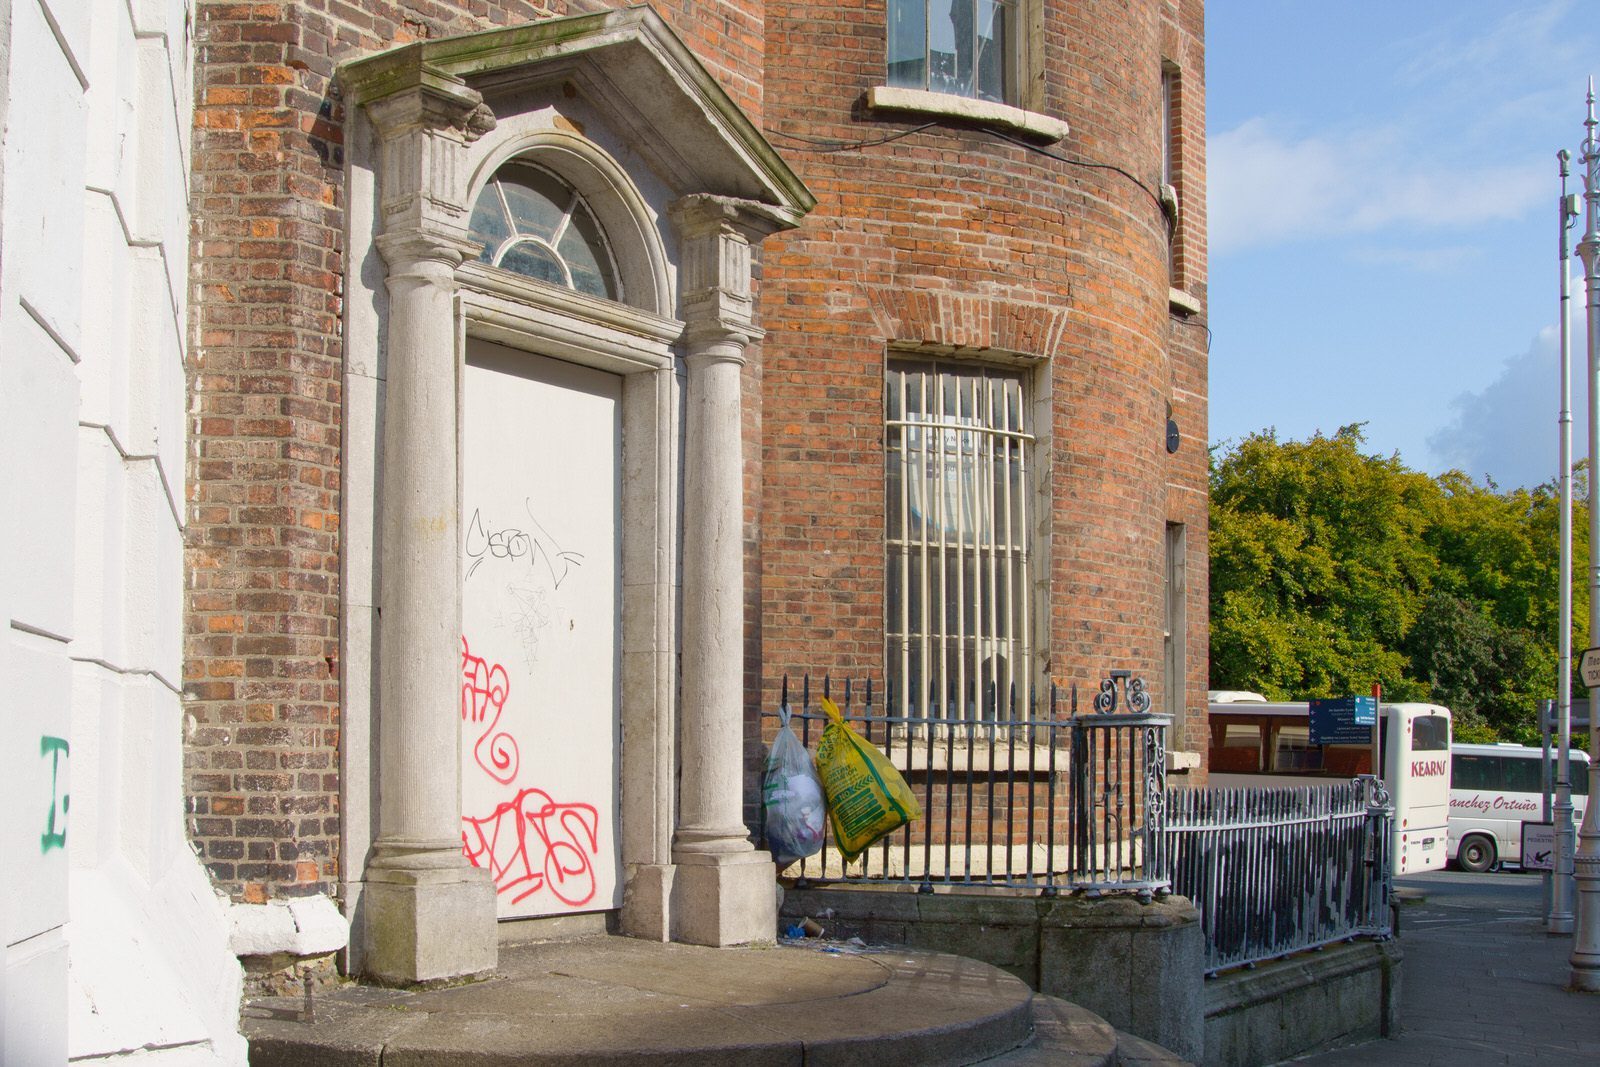 THIS UNOCCUPIED BUILDING WAS A SCHOOL [23-28 PARNELL SQUARE] 002